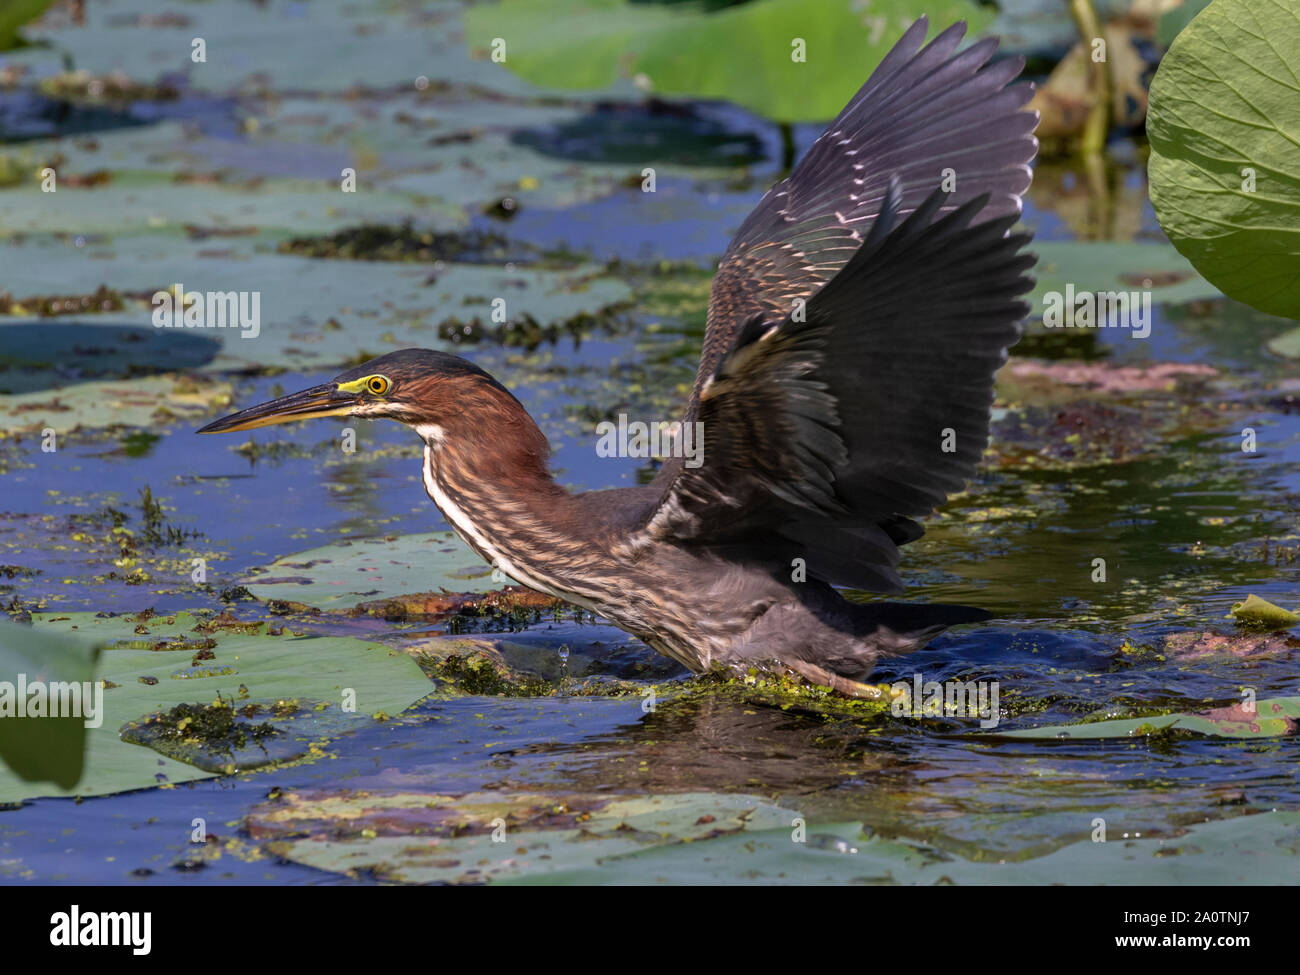 Green heron (Butorides virescens) hunting in a forest swamp among lotus leaves, Brazos Bend State Park, Texas, USA Stock Photo